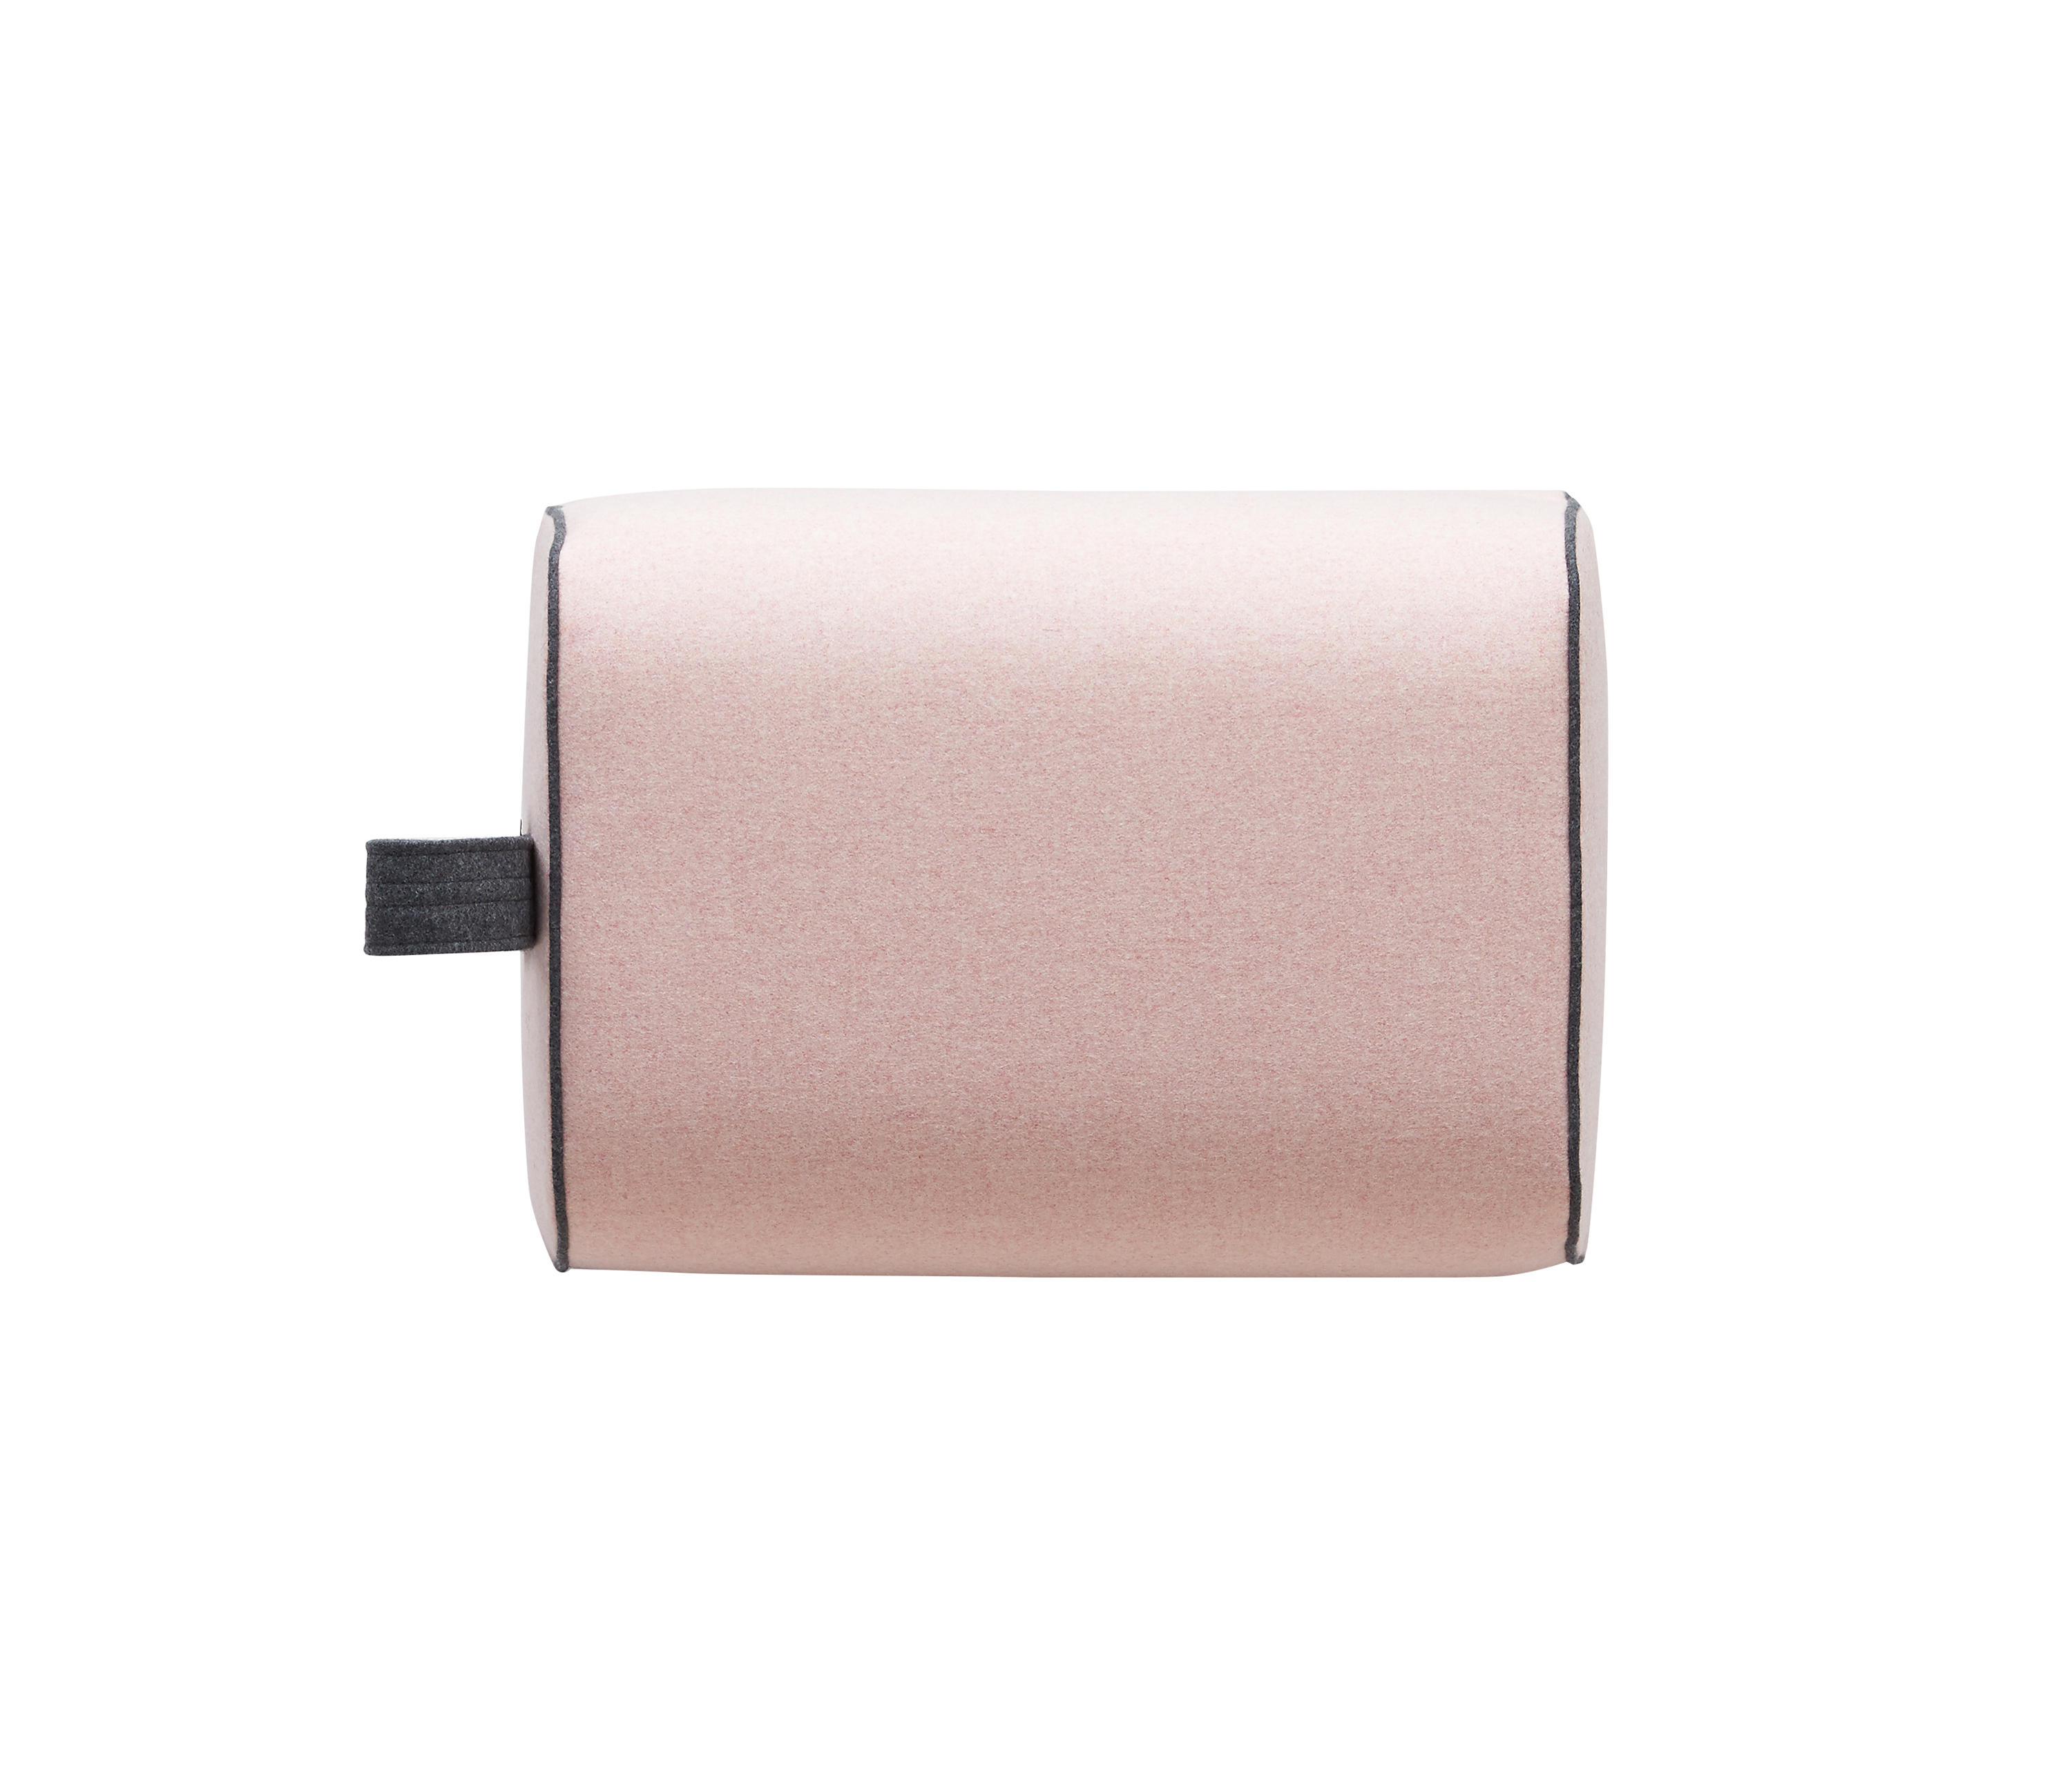 NECTOR POUF - Poufs from Softline A/S | Architonic